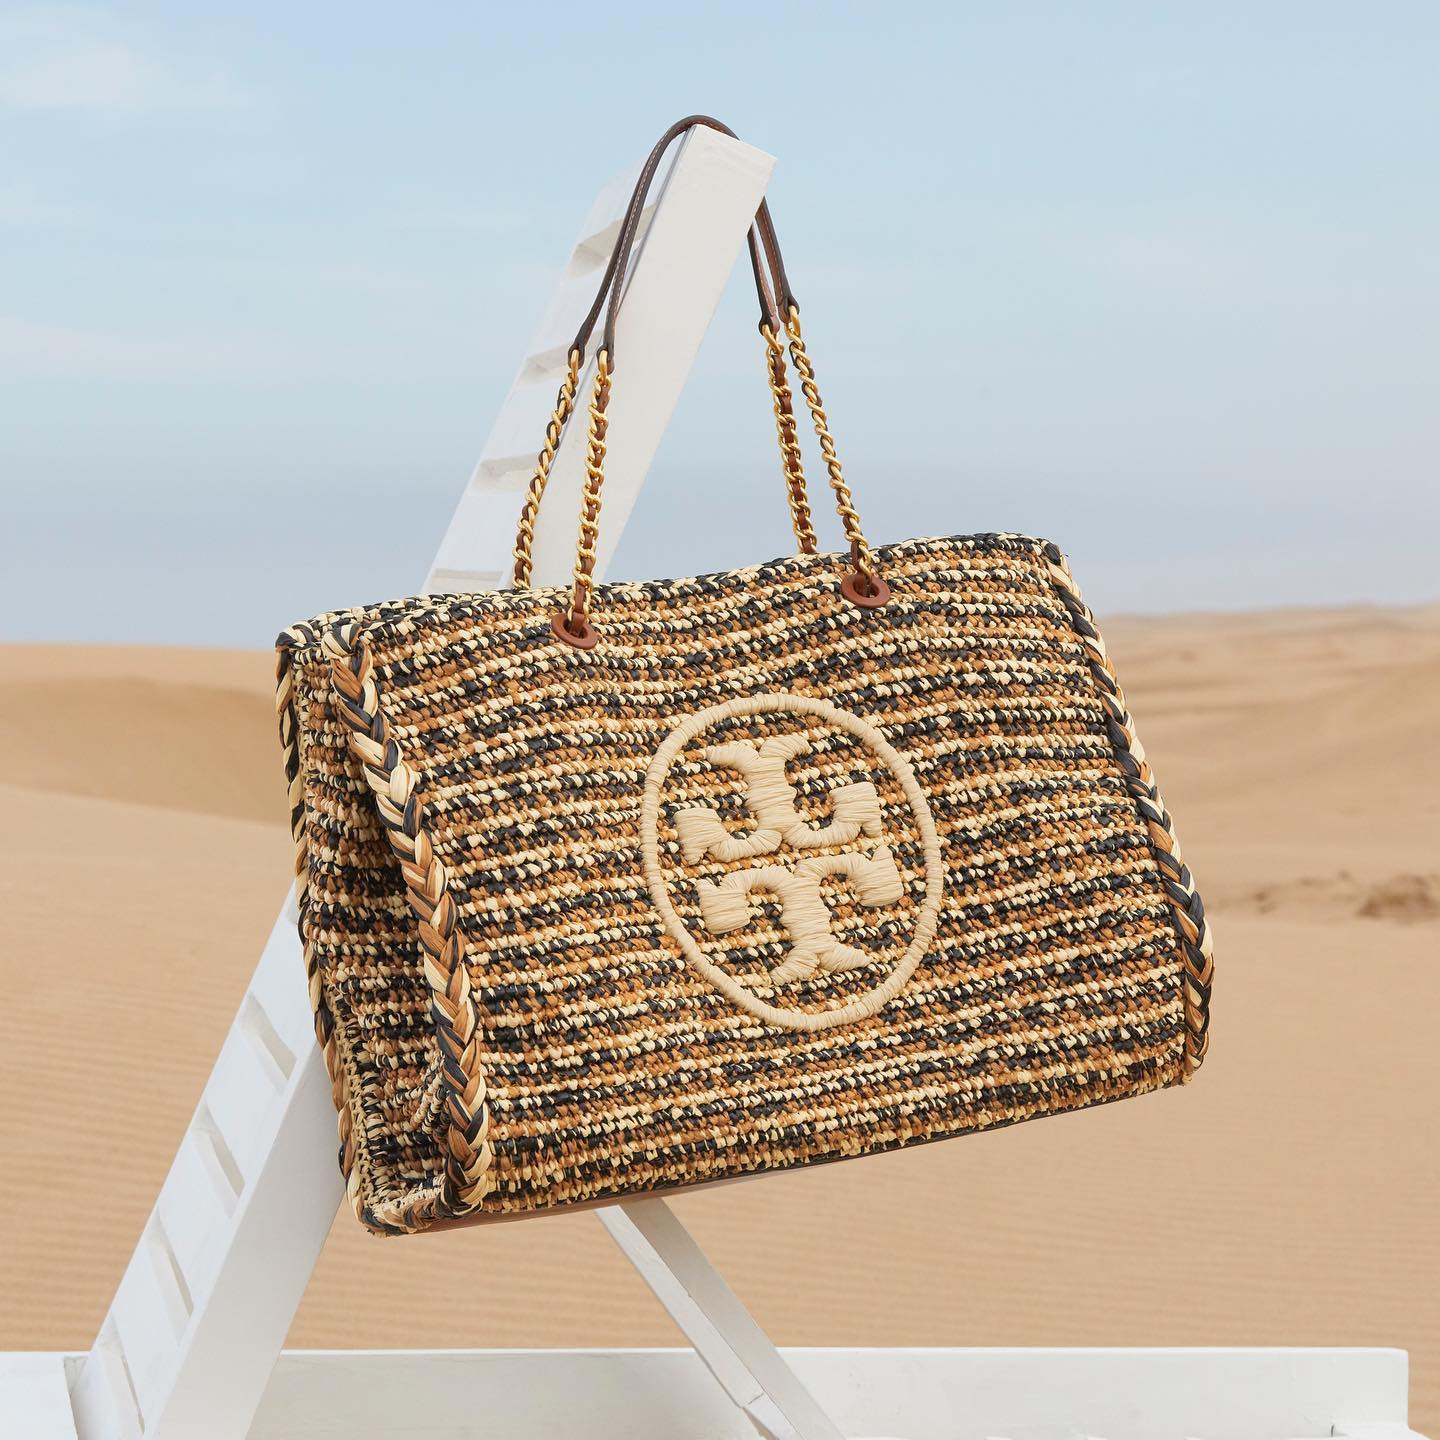 Tory Burch on Twitter: Natural beauty. The Ella Tote is made of